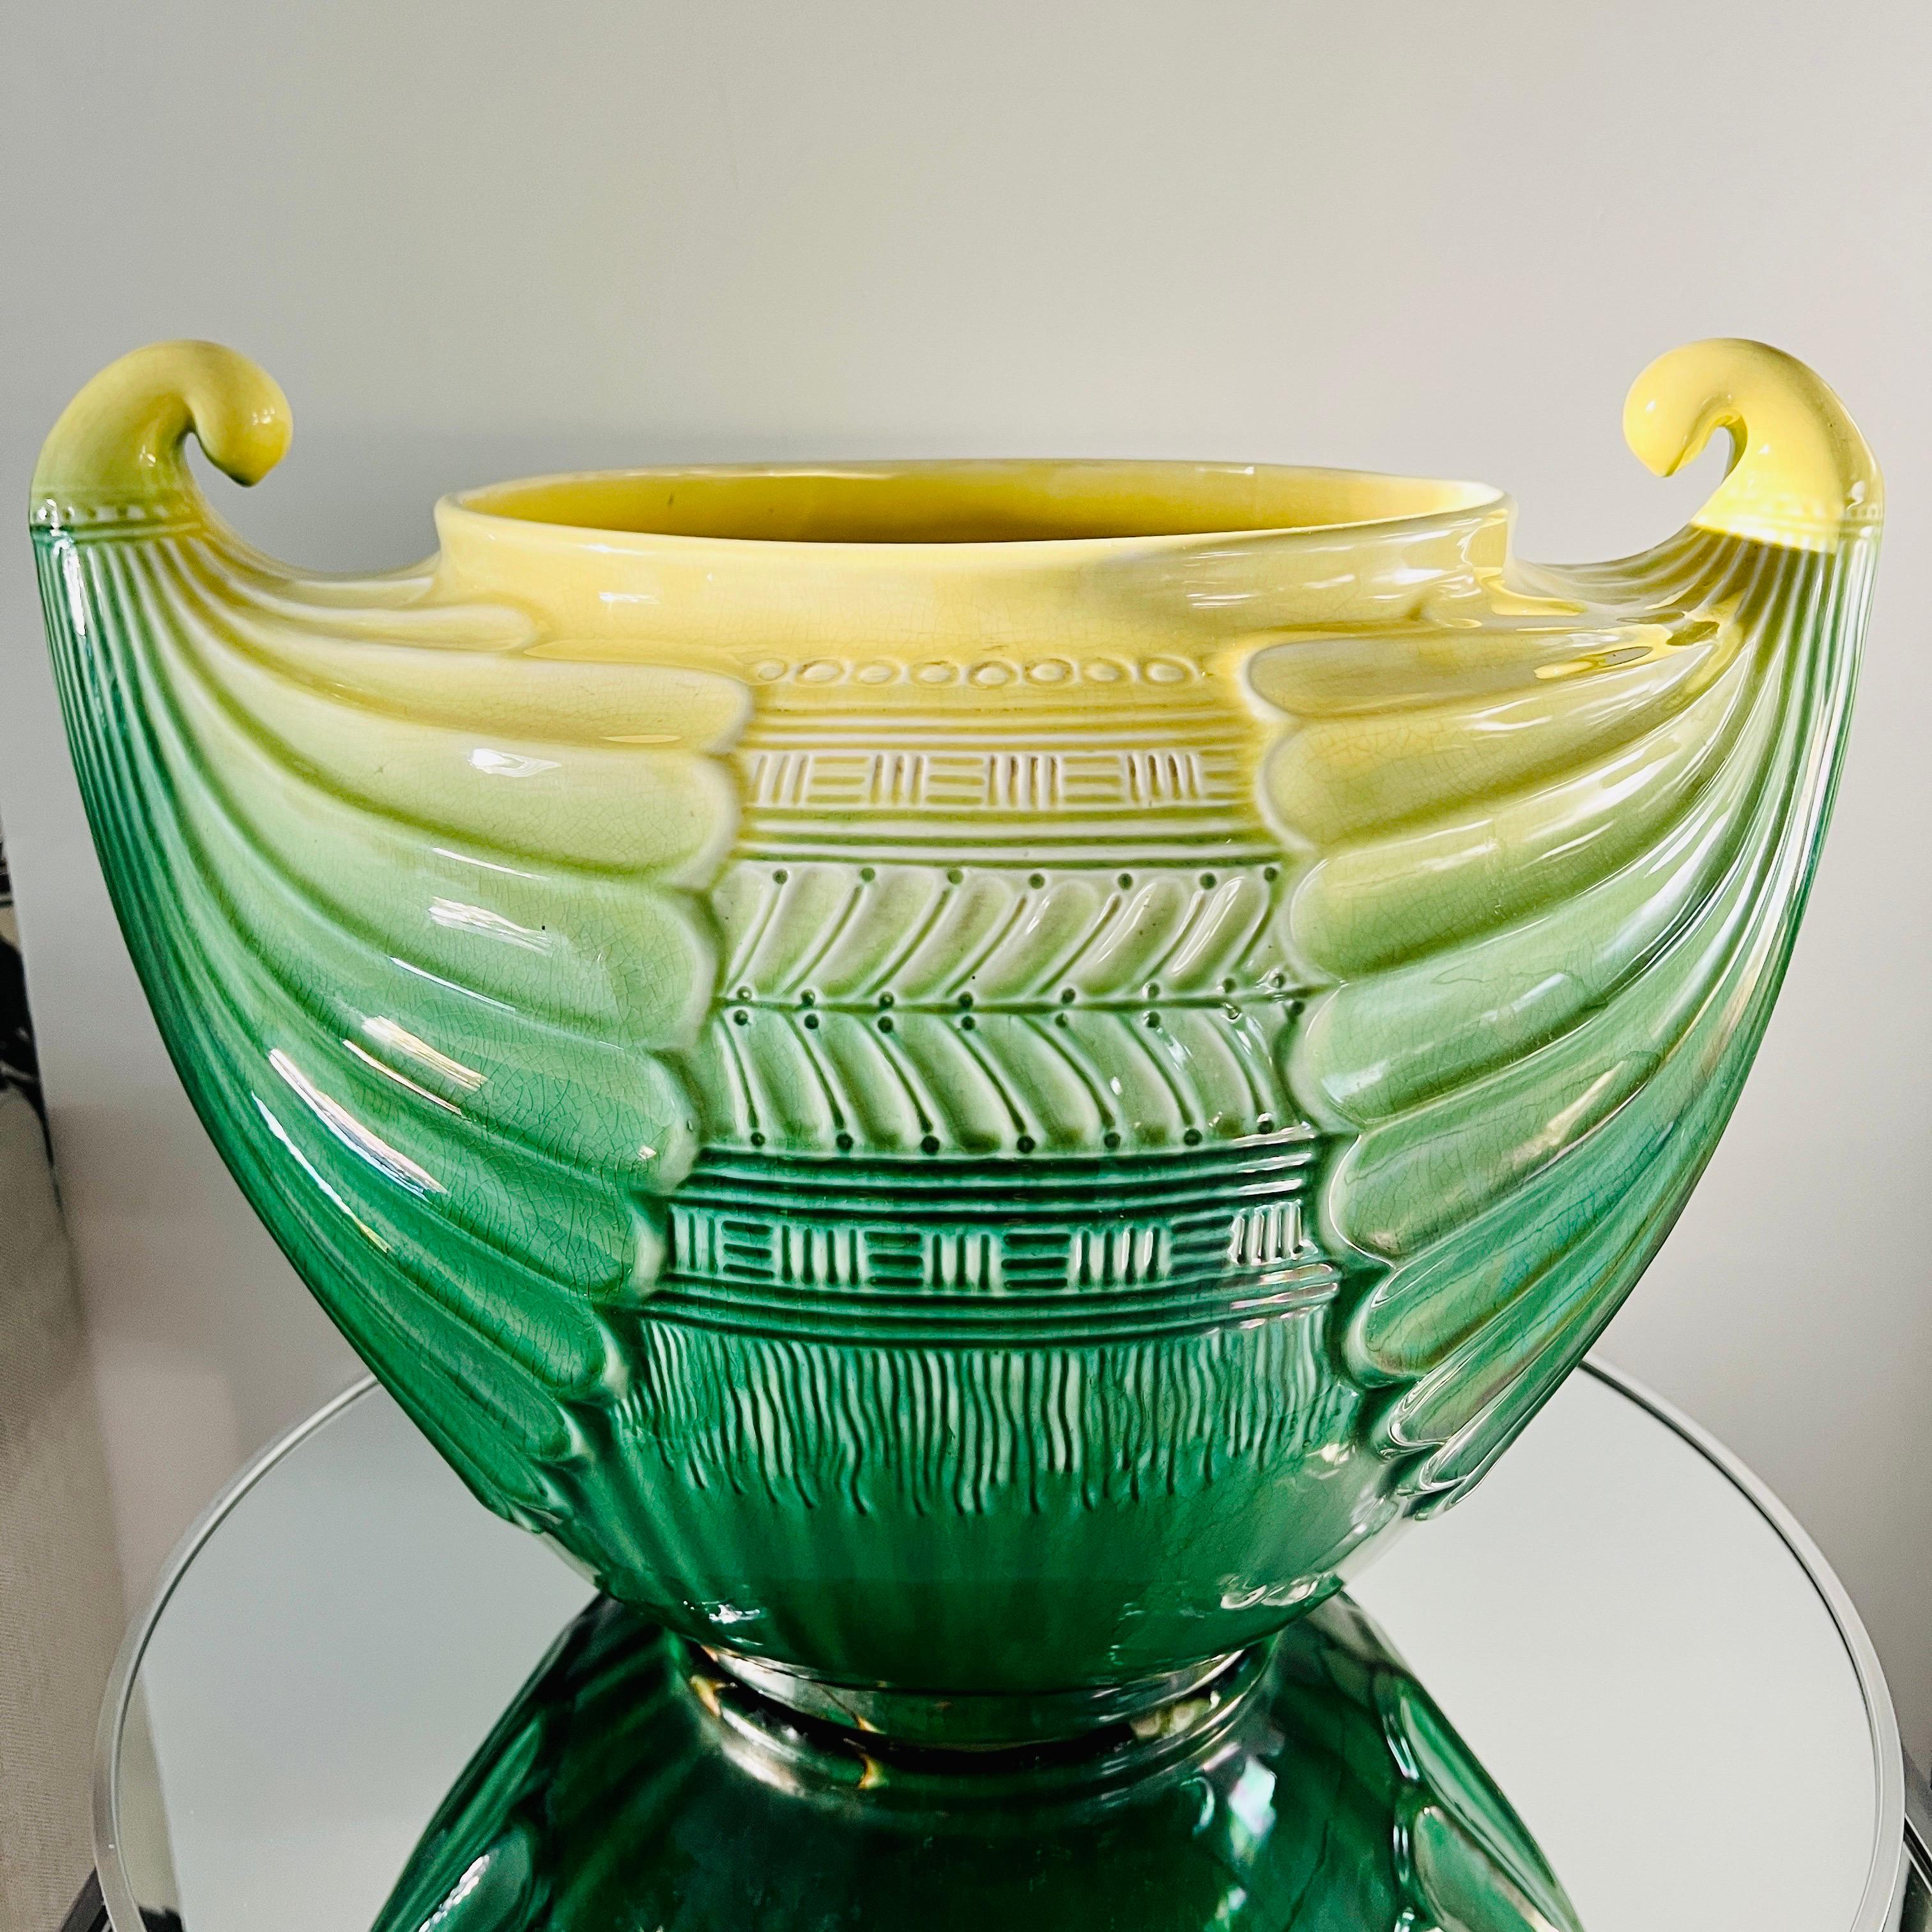 Large antique cachepot in green and yellow glazed terracotta by Christopher Dresser for SCI Laveno, Italy.  The urn features highly stylized fluted accents and scrolled handles, incorporating elements of both Art Nouveau and Art Deco designs. 